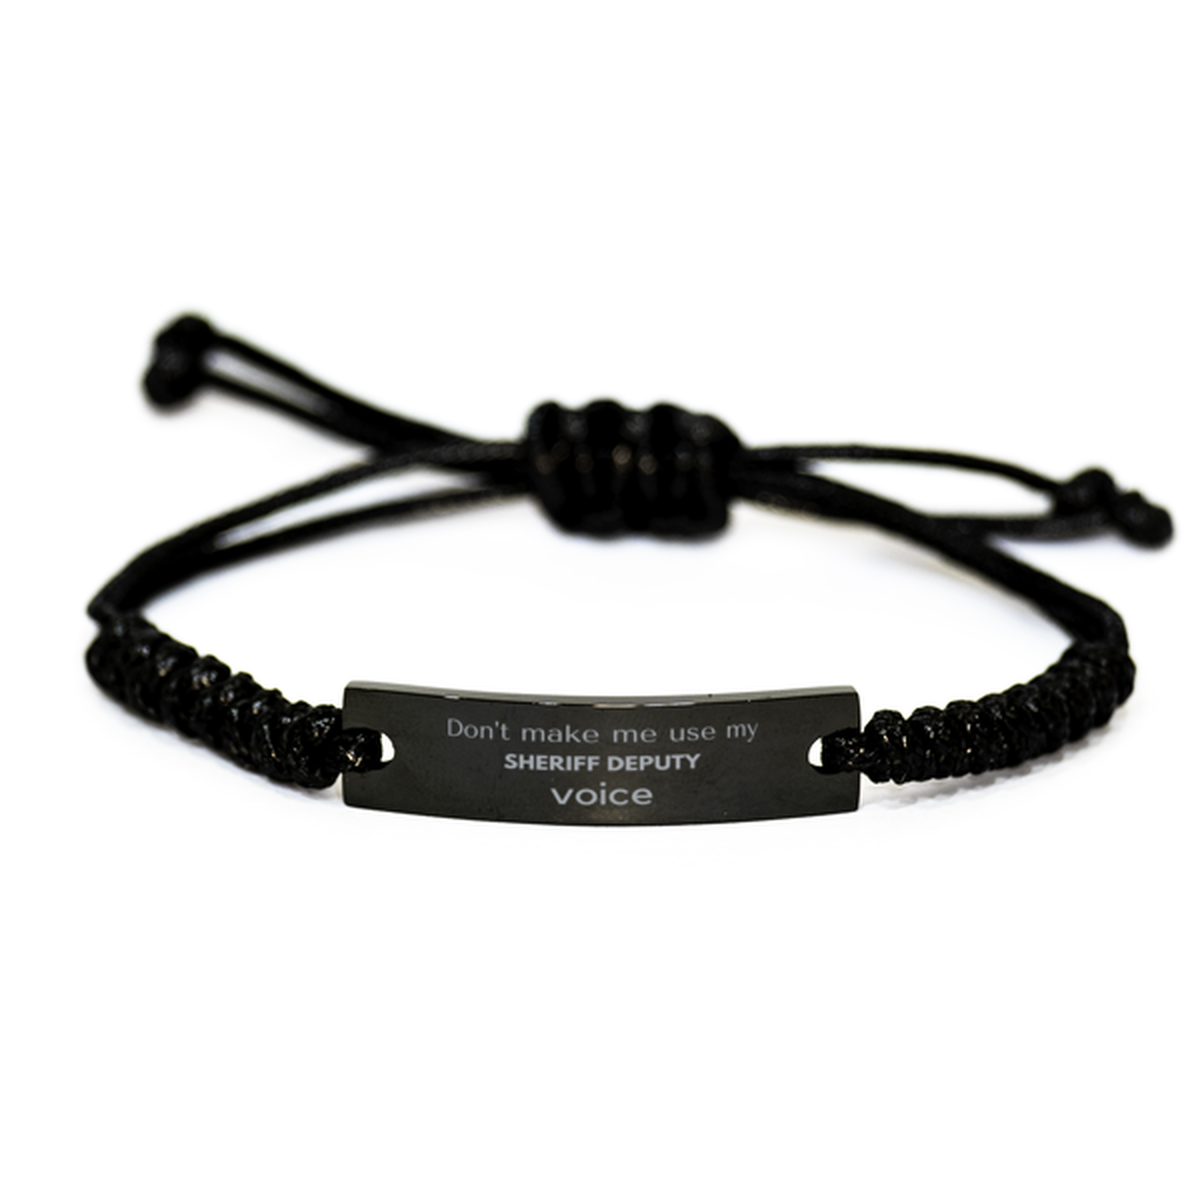 Don't make me use my Sheriff Deputy voice, Sarcasm Sheriff Deputy Gifts, Christmas Sheriff Deputy Black Rope Bracelet Birthday Unique Gifts For Sheriff Deputy Coworkers, Men, Women, Colleague, Friends